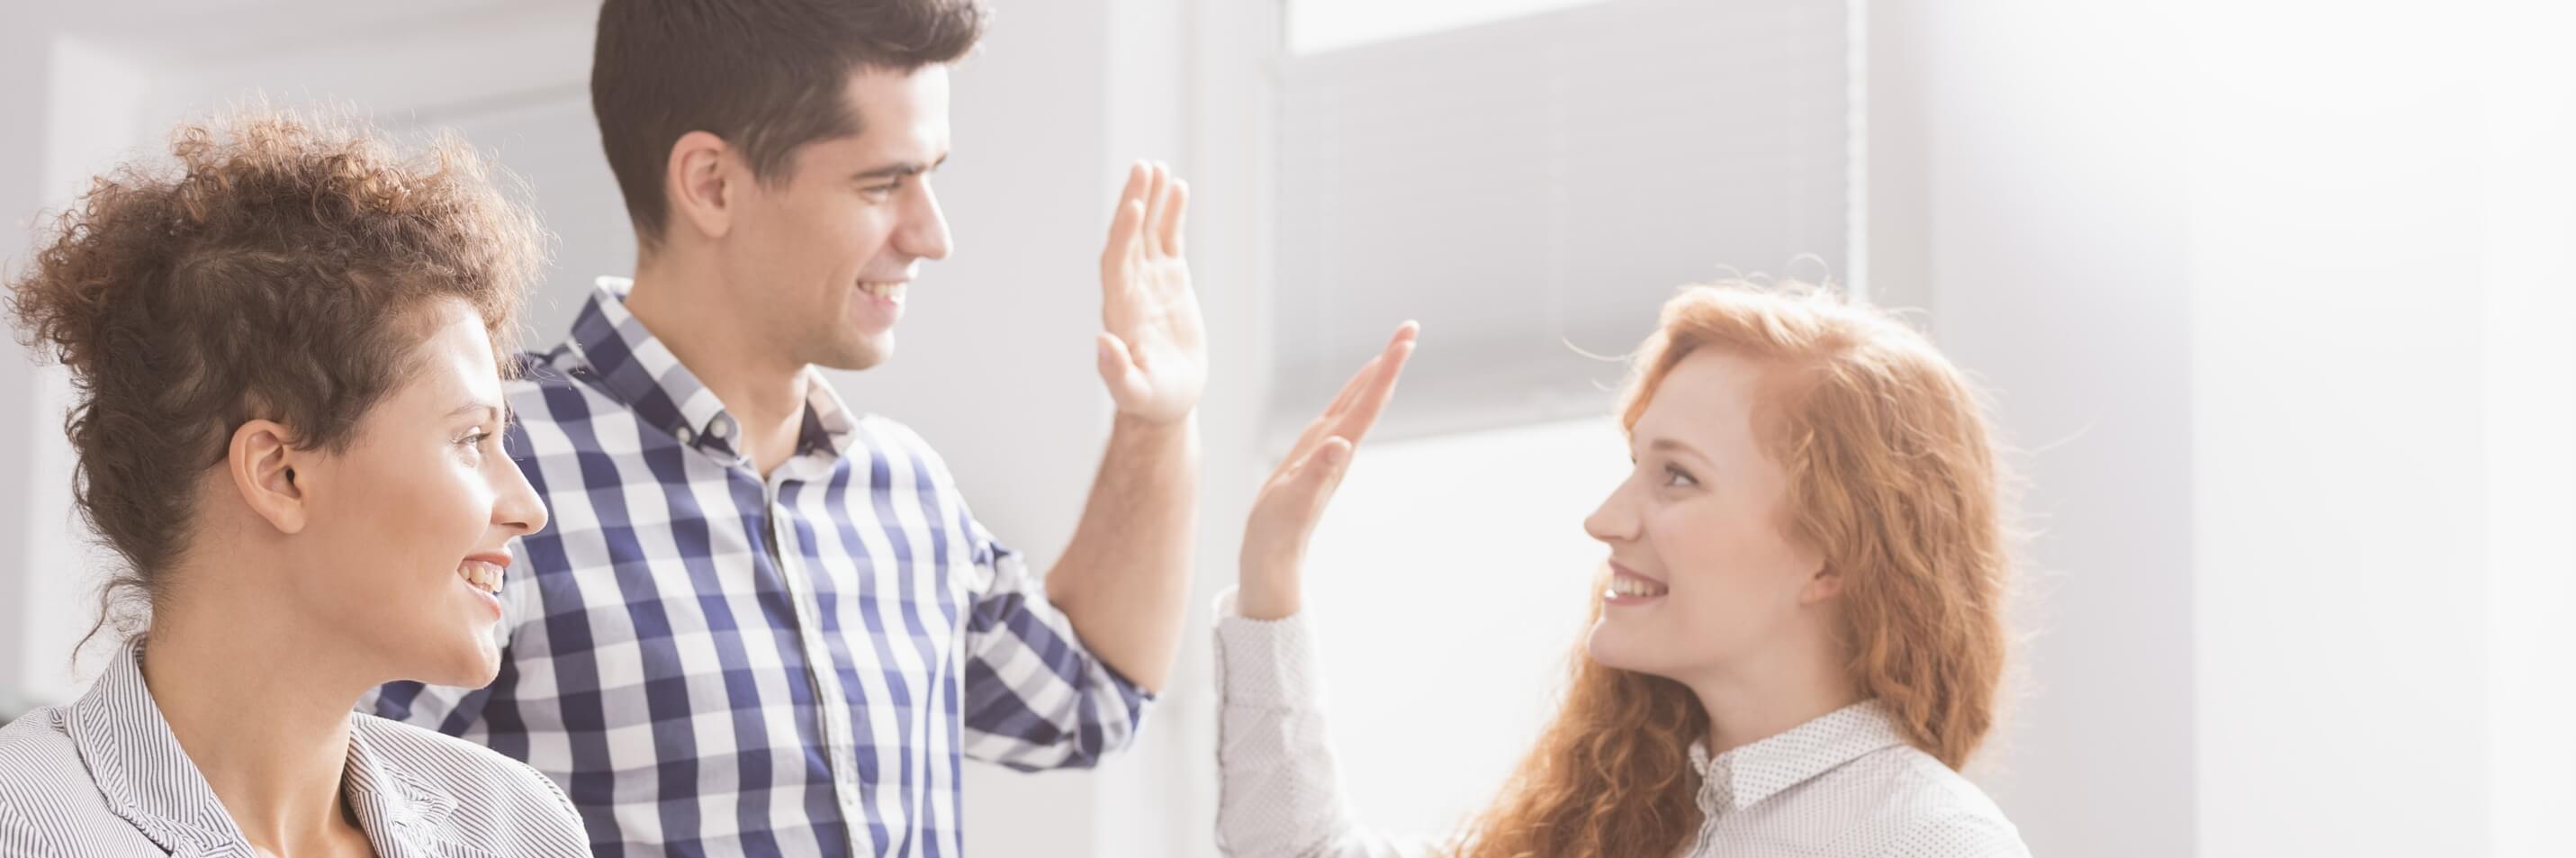 small business meeting. man giving high five to woman